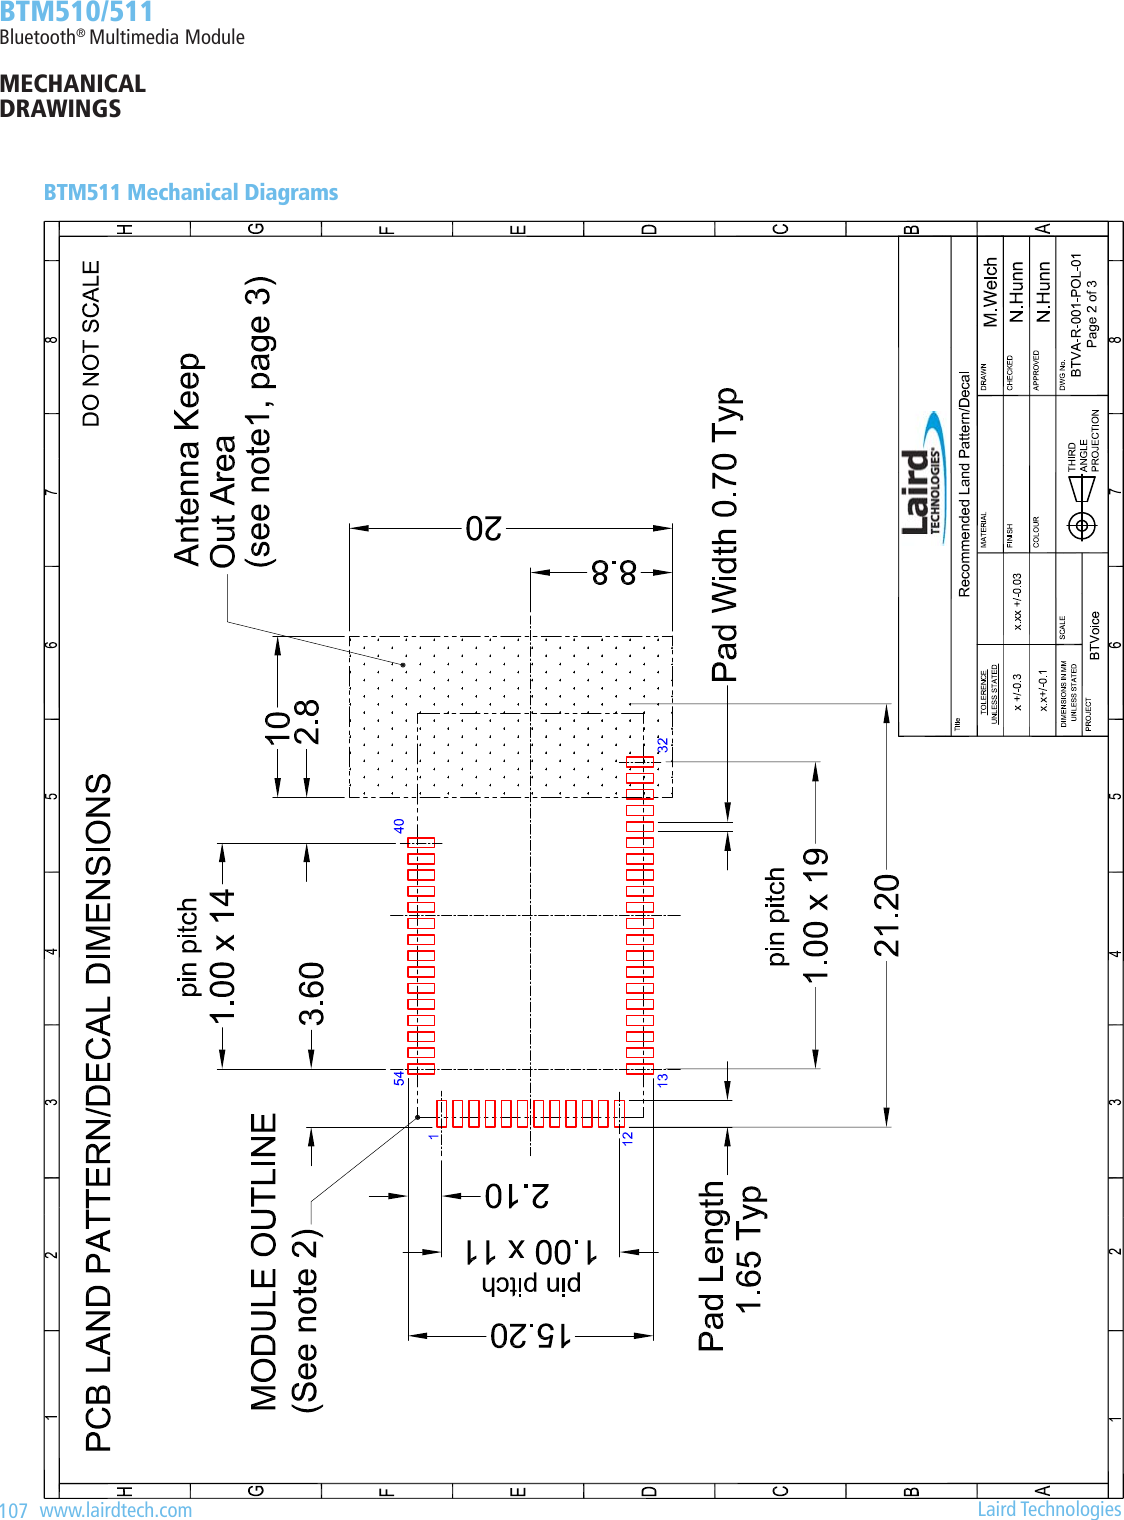 107   www.lairdtech.com  Laird Technologies  BTM510/511Bluetooth® Multimedia Module4.) Ensure their is no exposed copper under the module on host p.c. board to avoid shorting to the test points on the underside of the moduleBTM511 Mechanical DiagramsMECHANICAL DRAWINGS